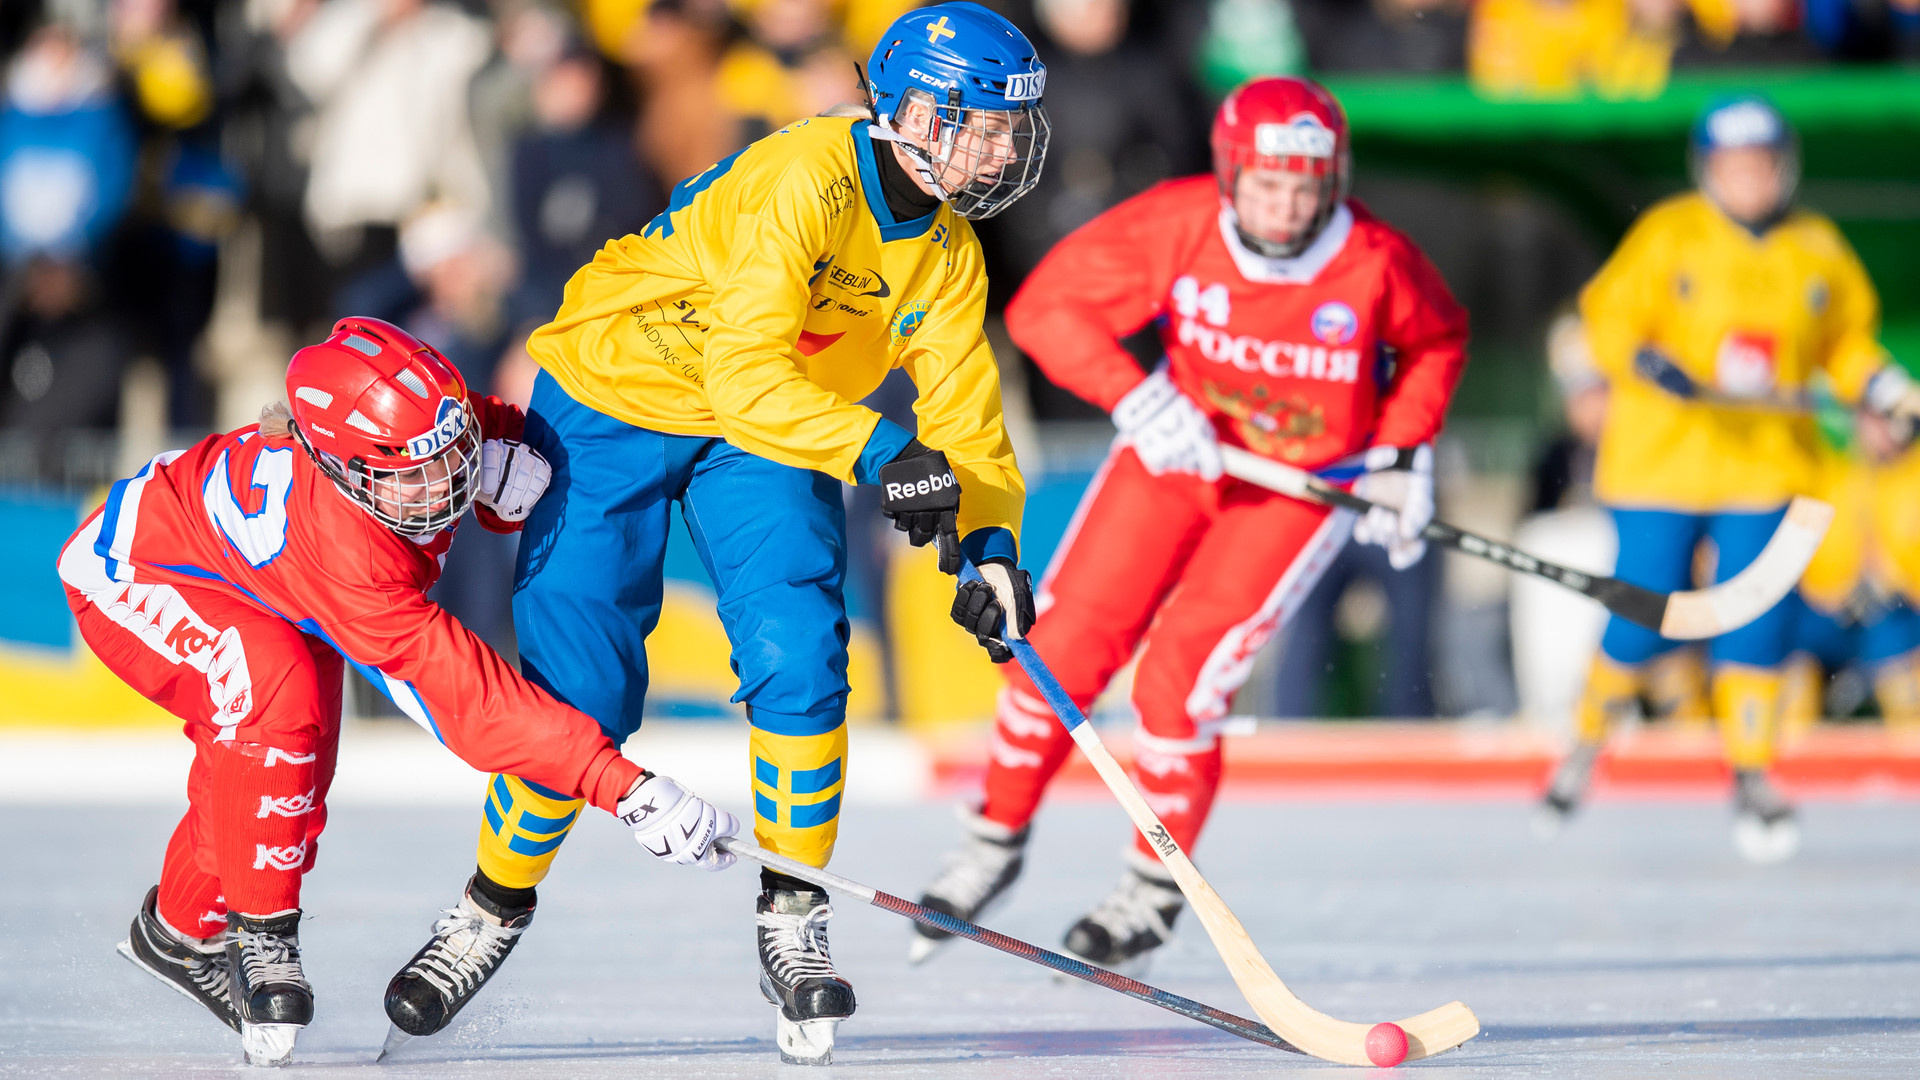 Bandy (Sports): Russia vs. Sweden, International competitive winter sports discipline. 1920x1080 Full HD Background.